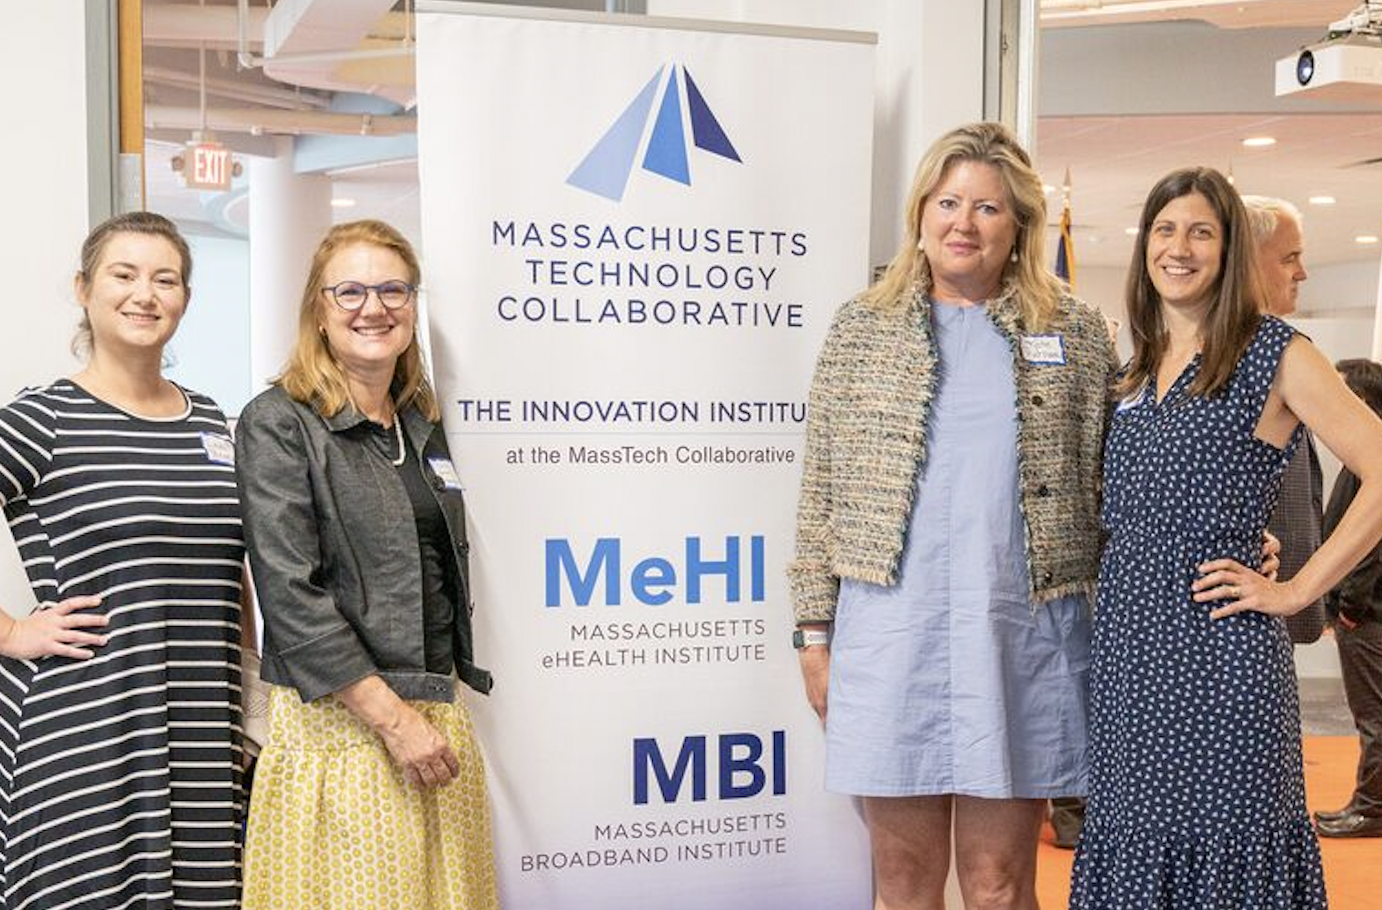 Left to right: Laura Teicher of FORGE, Lucy Steinert, Kate Putnam, and Karen Carswell of Meristem Partners